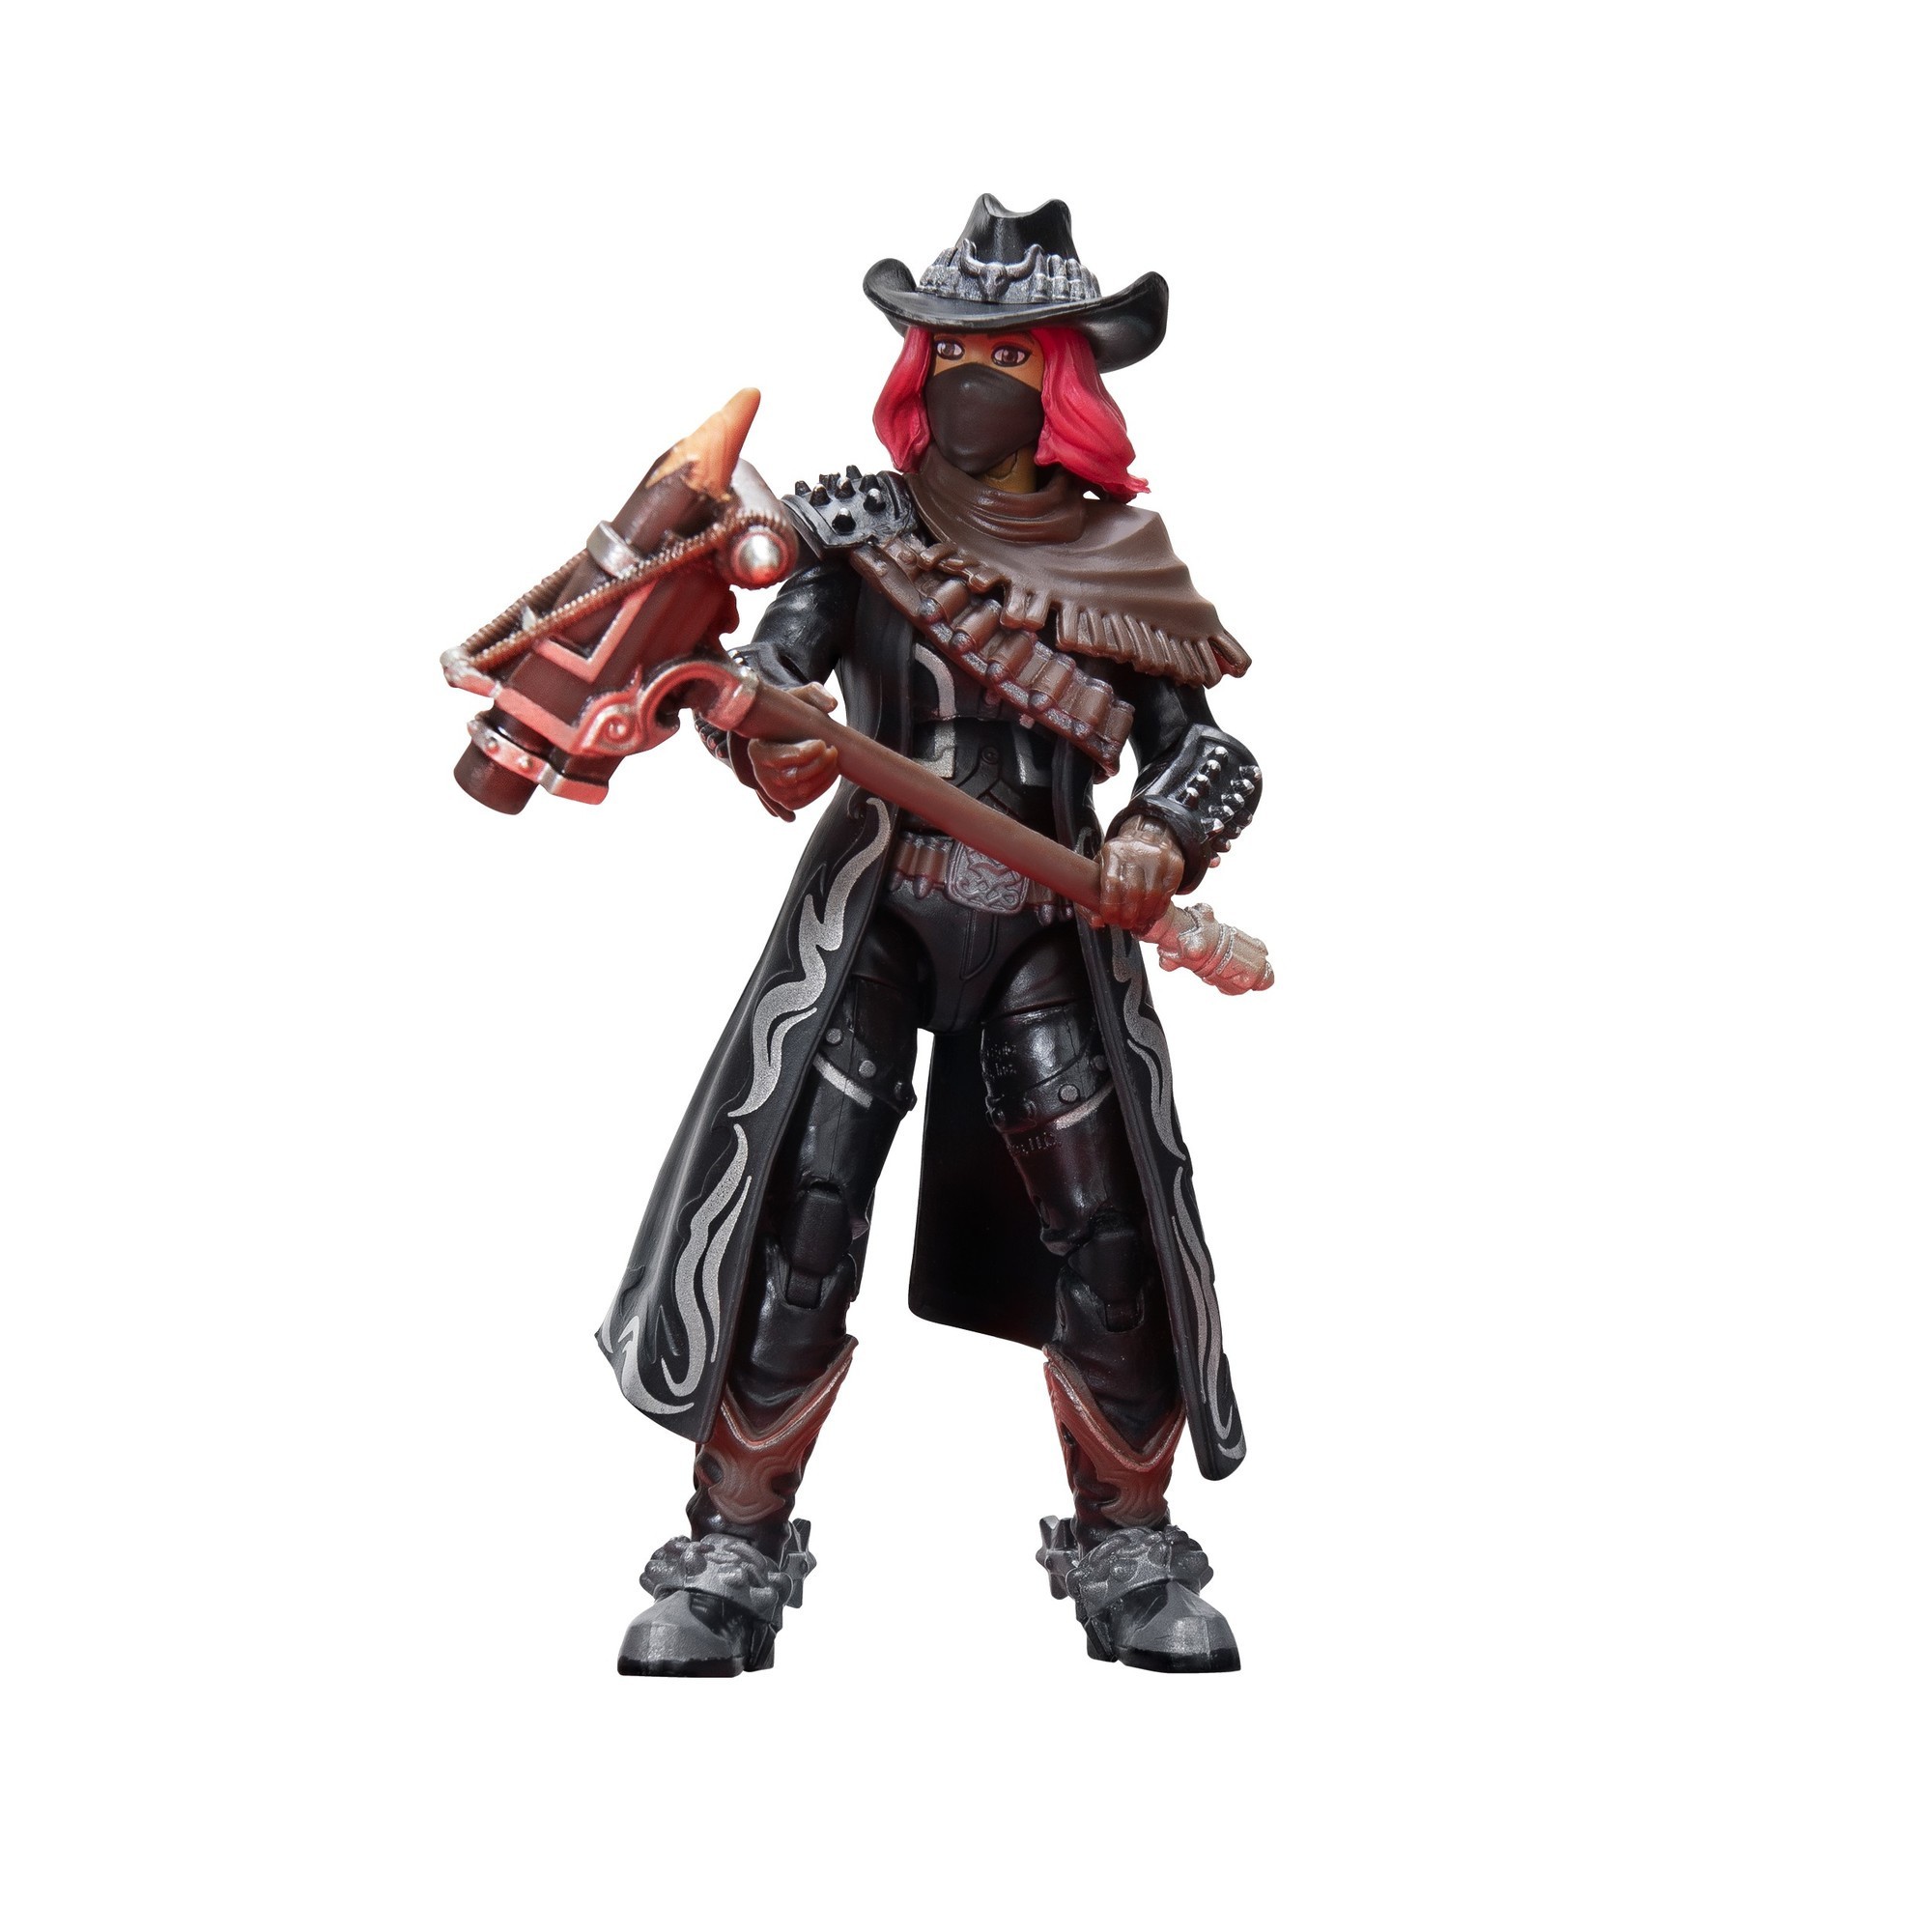  Jazwares Fortnite: Mode Solo - Figurine d'action Calamity- - Action f